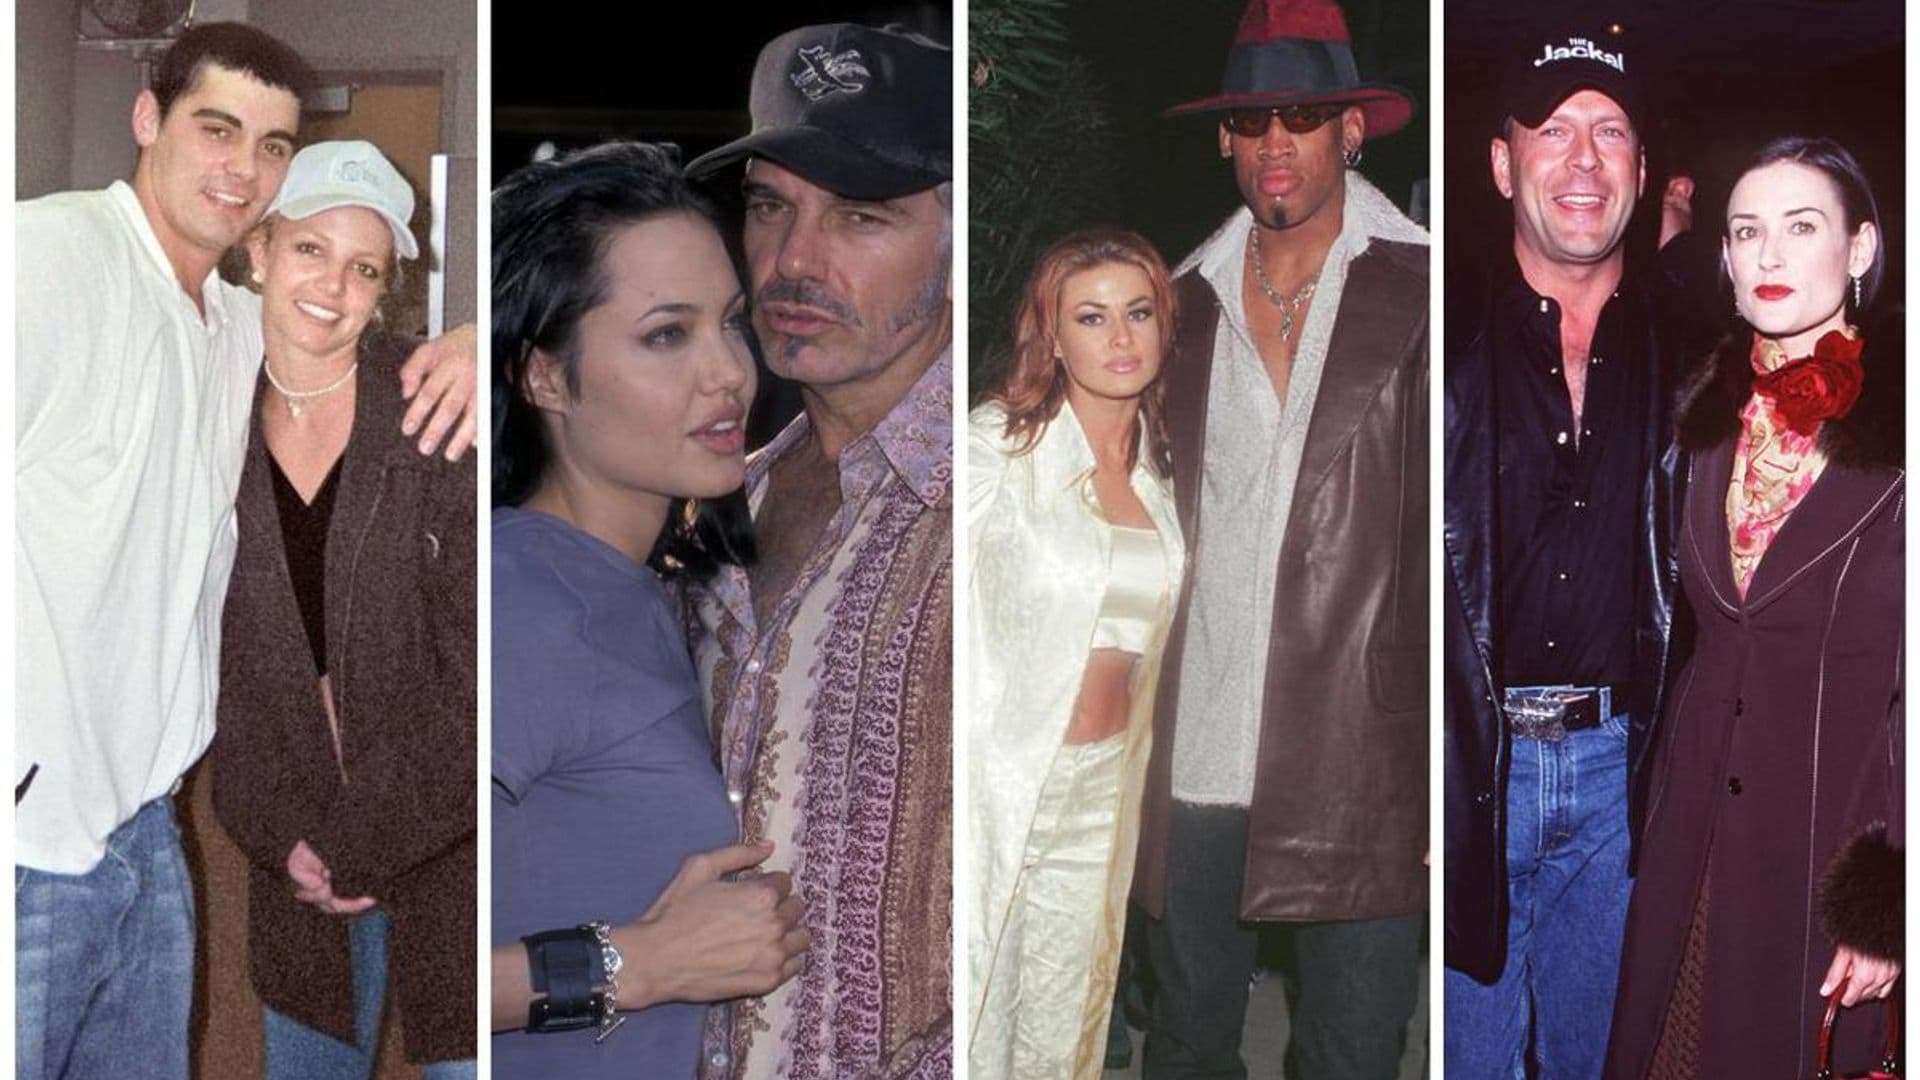 From Britney Spears and Jason Alexander to Demi Moore and Bruce Willis: Some of the celebs who tied the knot in Las Vegas